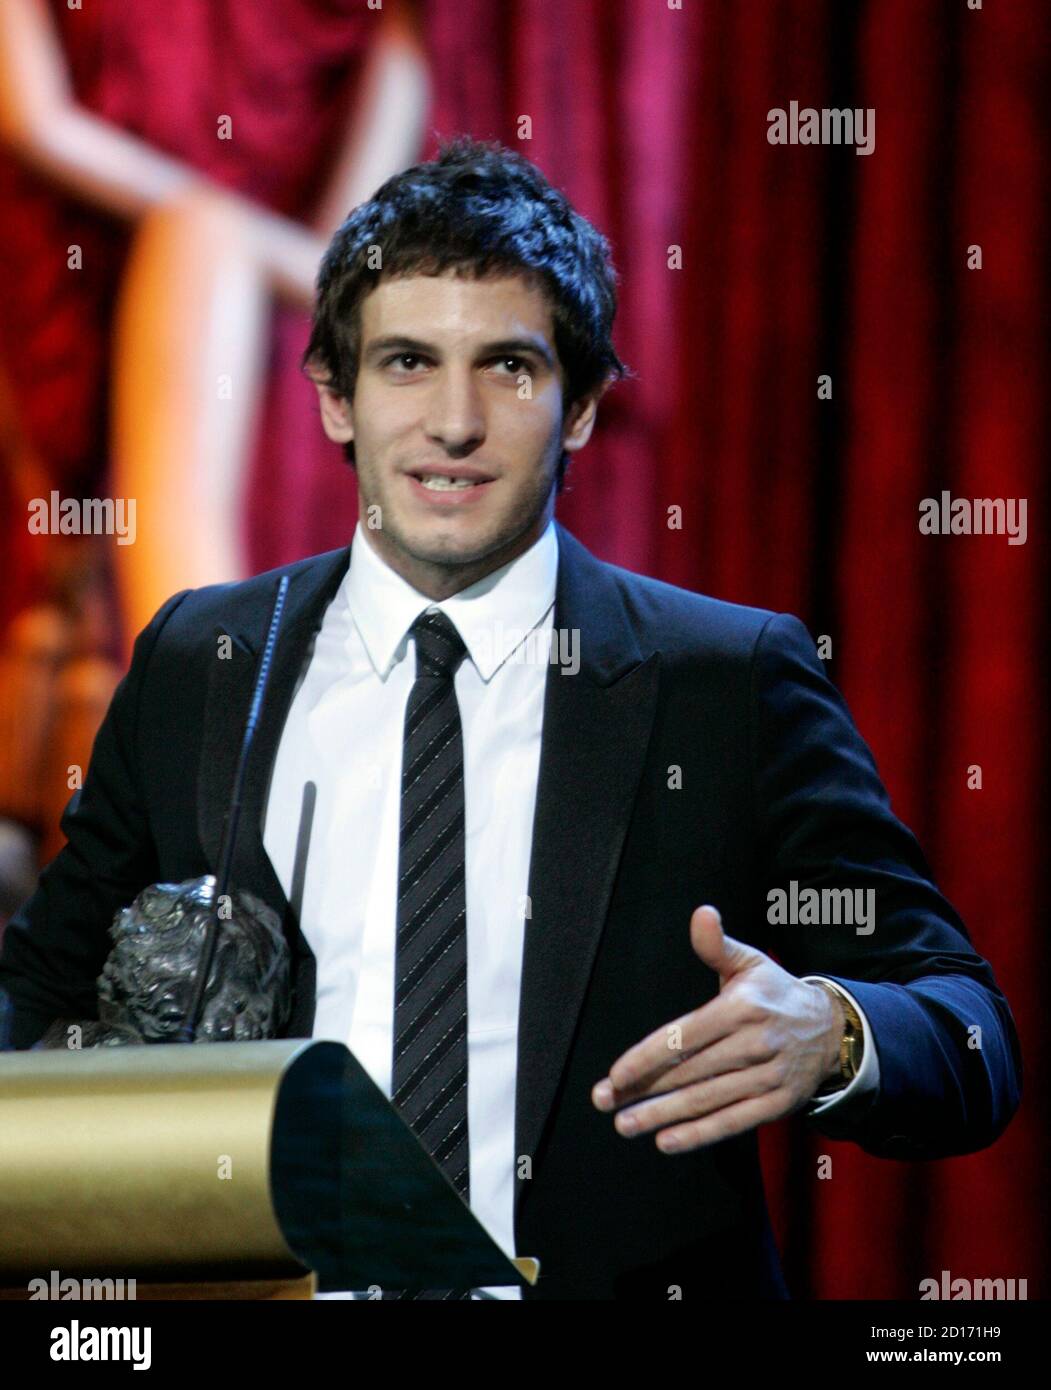 Actor Quim Gutierrez reacts upon receiving a 'Goya' award during the Spanish Film Academy 'Goya' awards ceremony in Madrid January 28, 2007. Gutierrez won the Best Upcoming Actor award for his performance in the movie 'Azul oscuro casi negro'.    REUTERS/Andrea Comas (SPAIN) Stock Photo